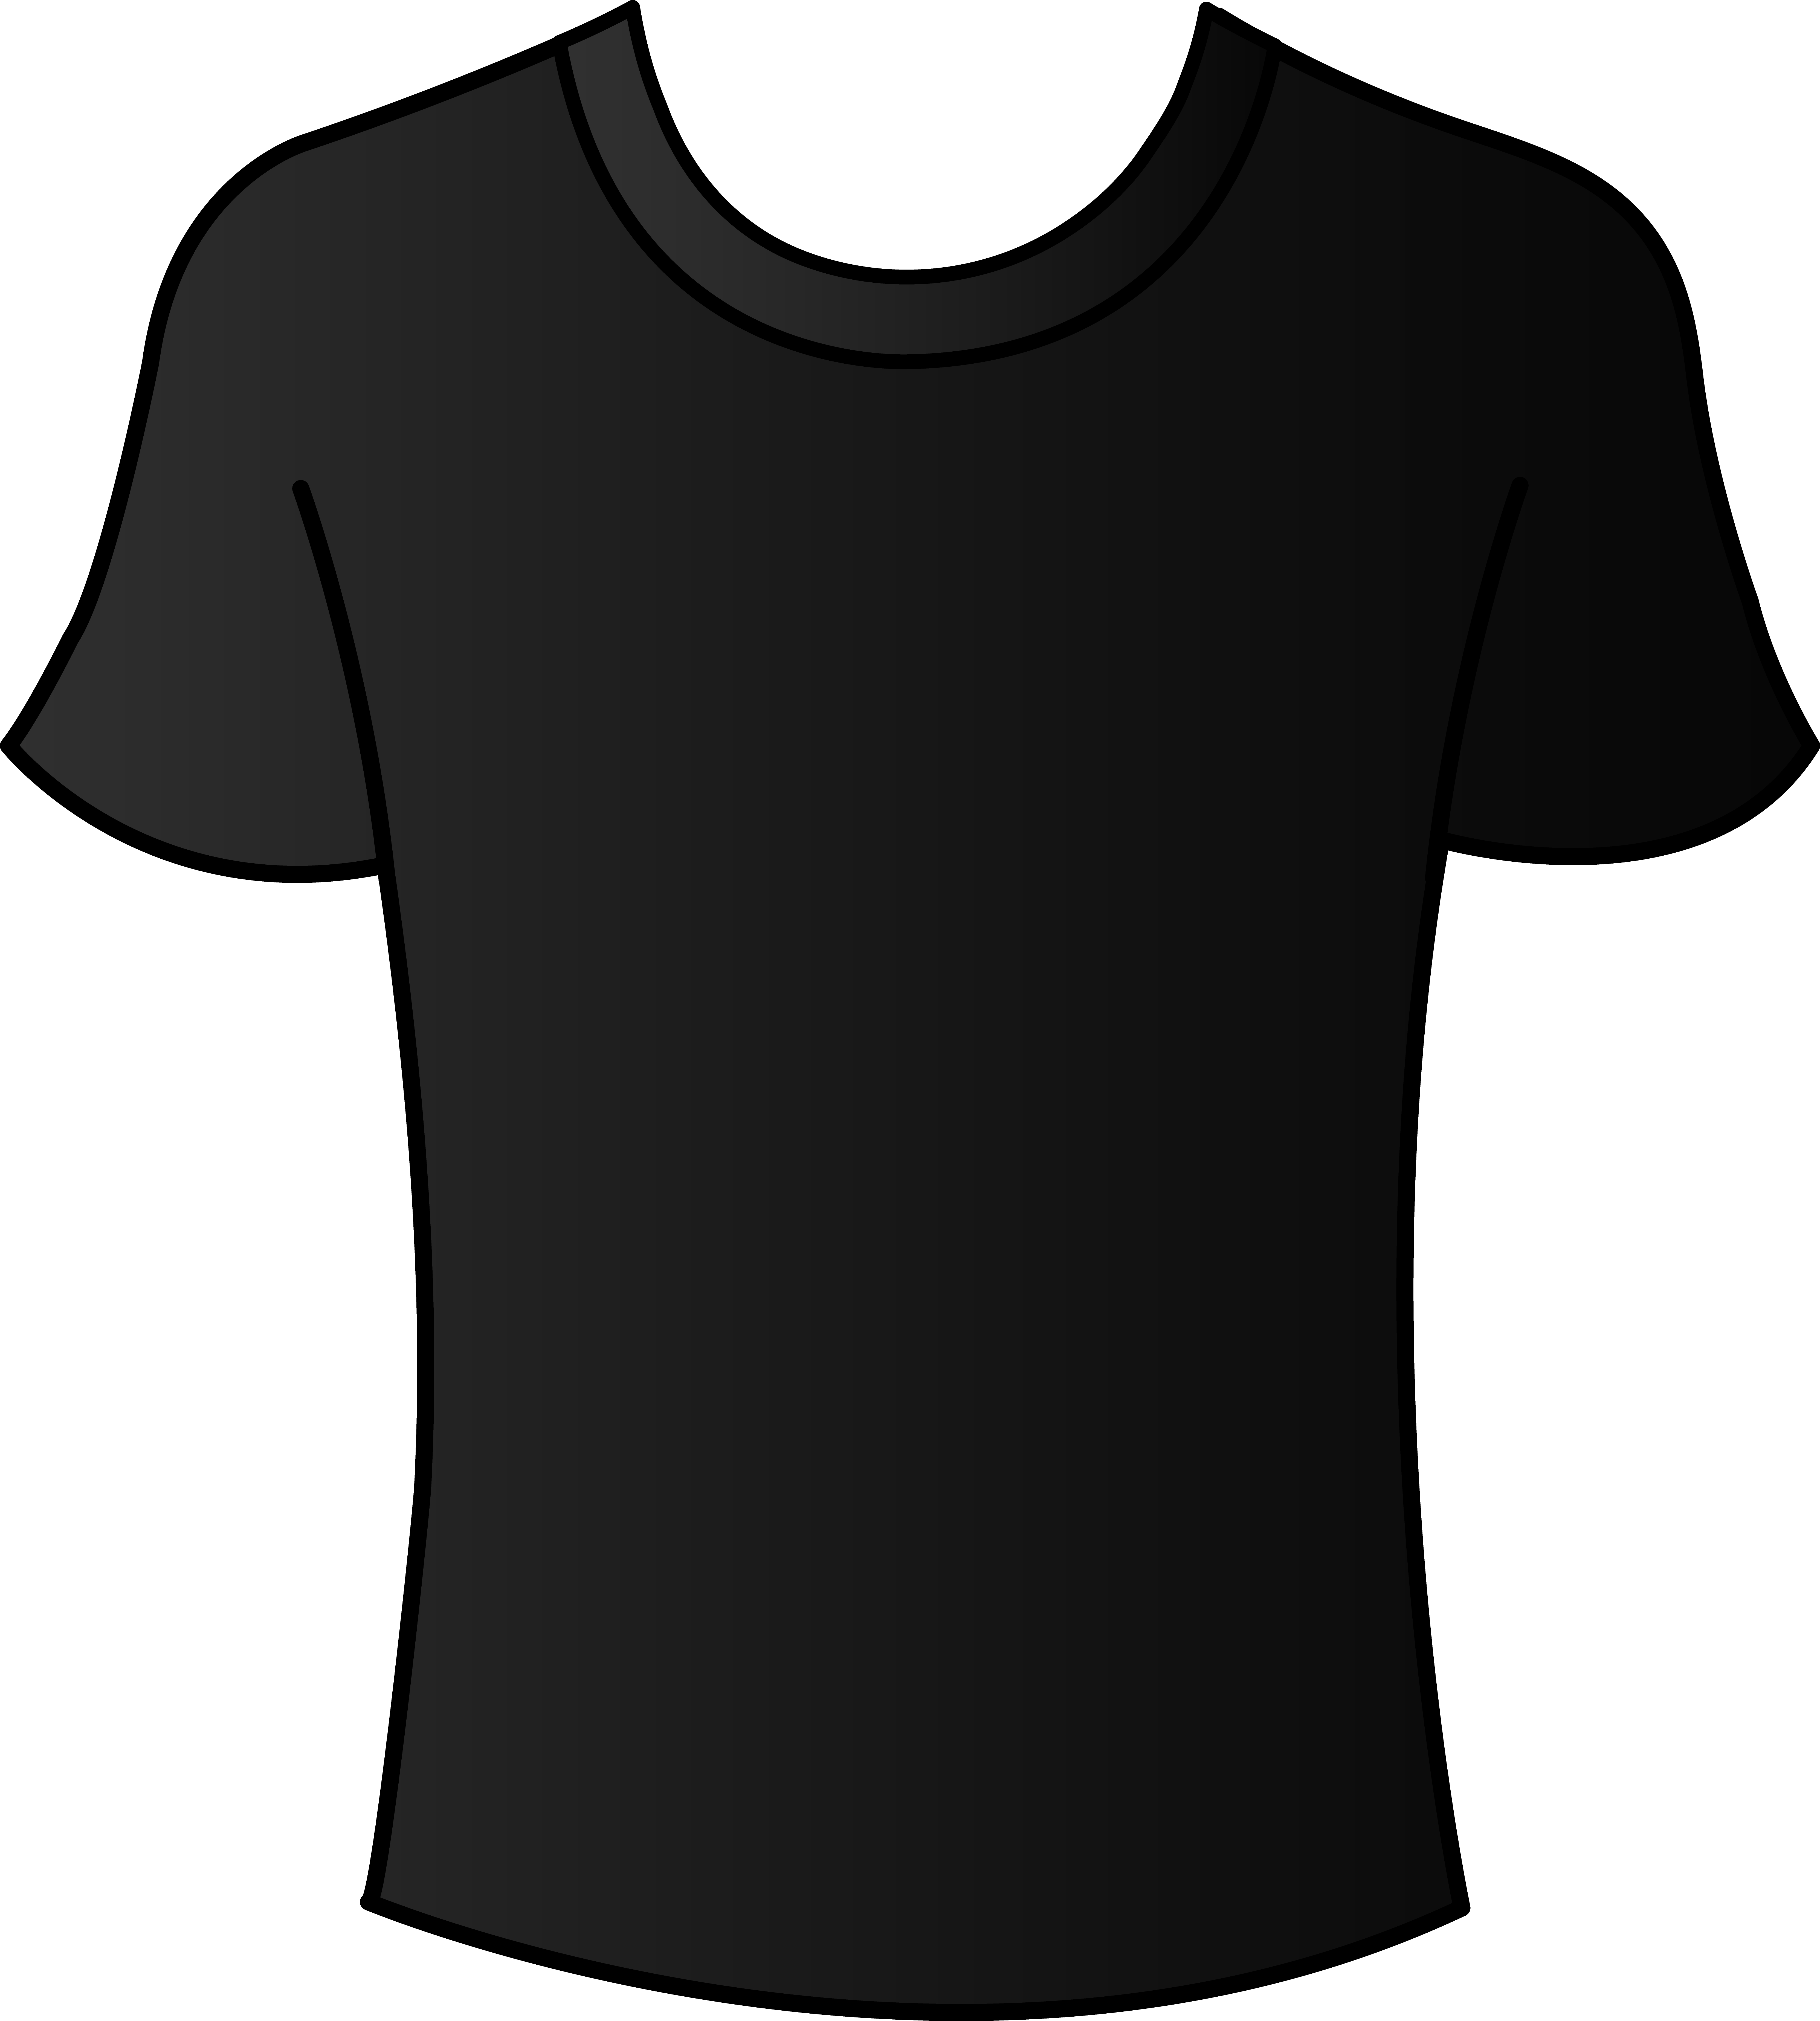 Clip Arts Related To : t shirt clipart png. 